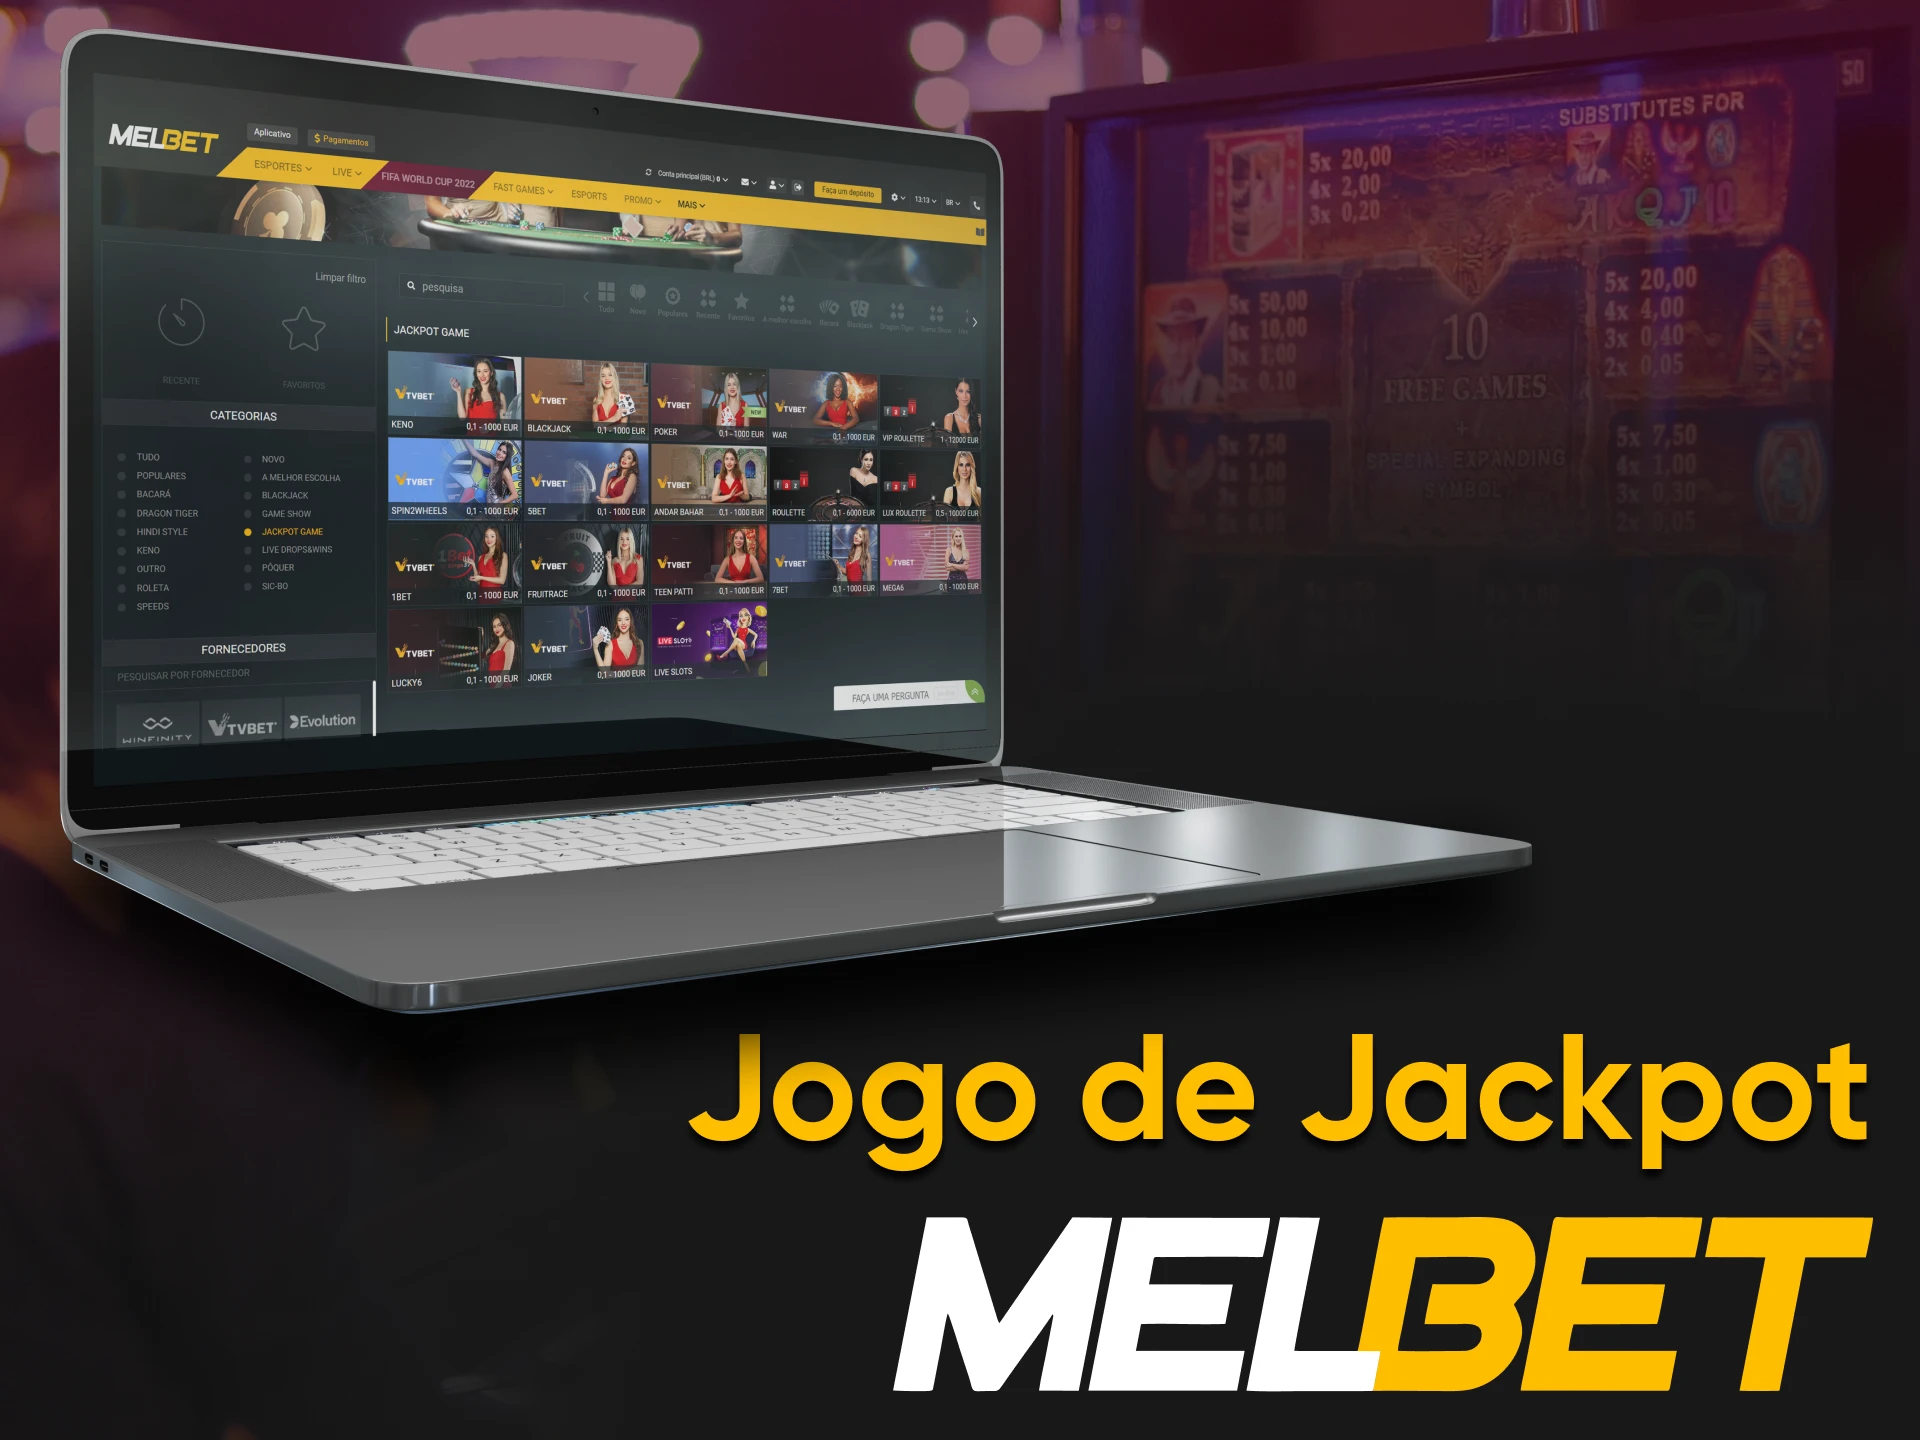 To play the Melbet Jackpot, go to the desired section.